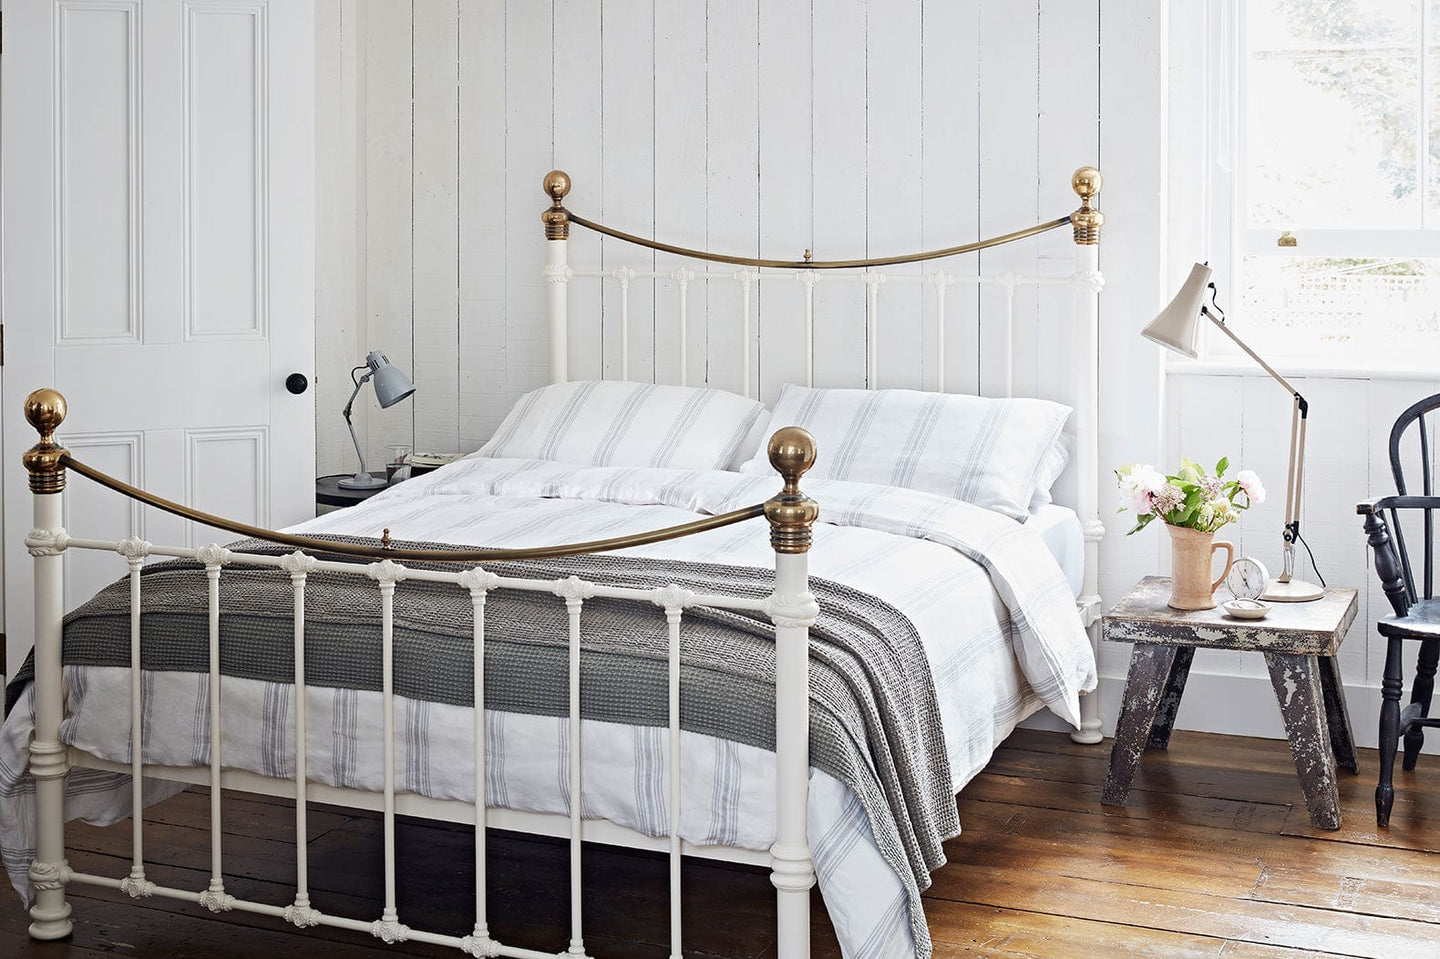 Brass Bedstead  Authentic Victorian Brass Metal Bed – Cornish Beds